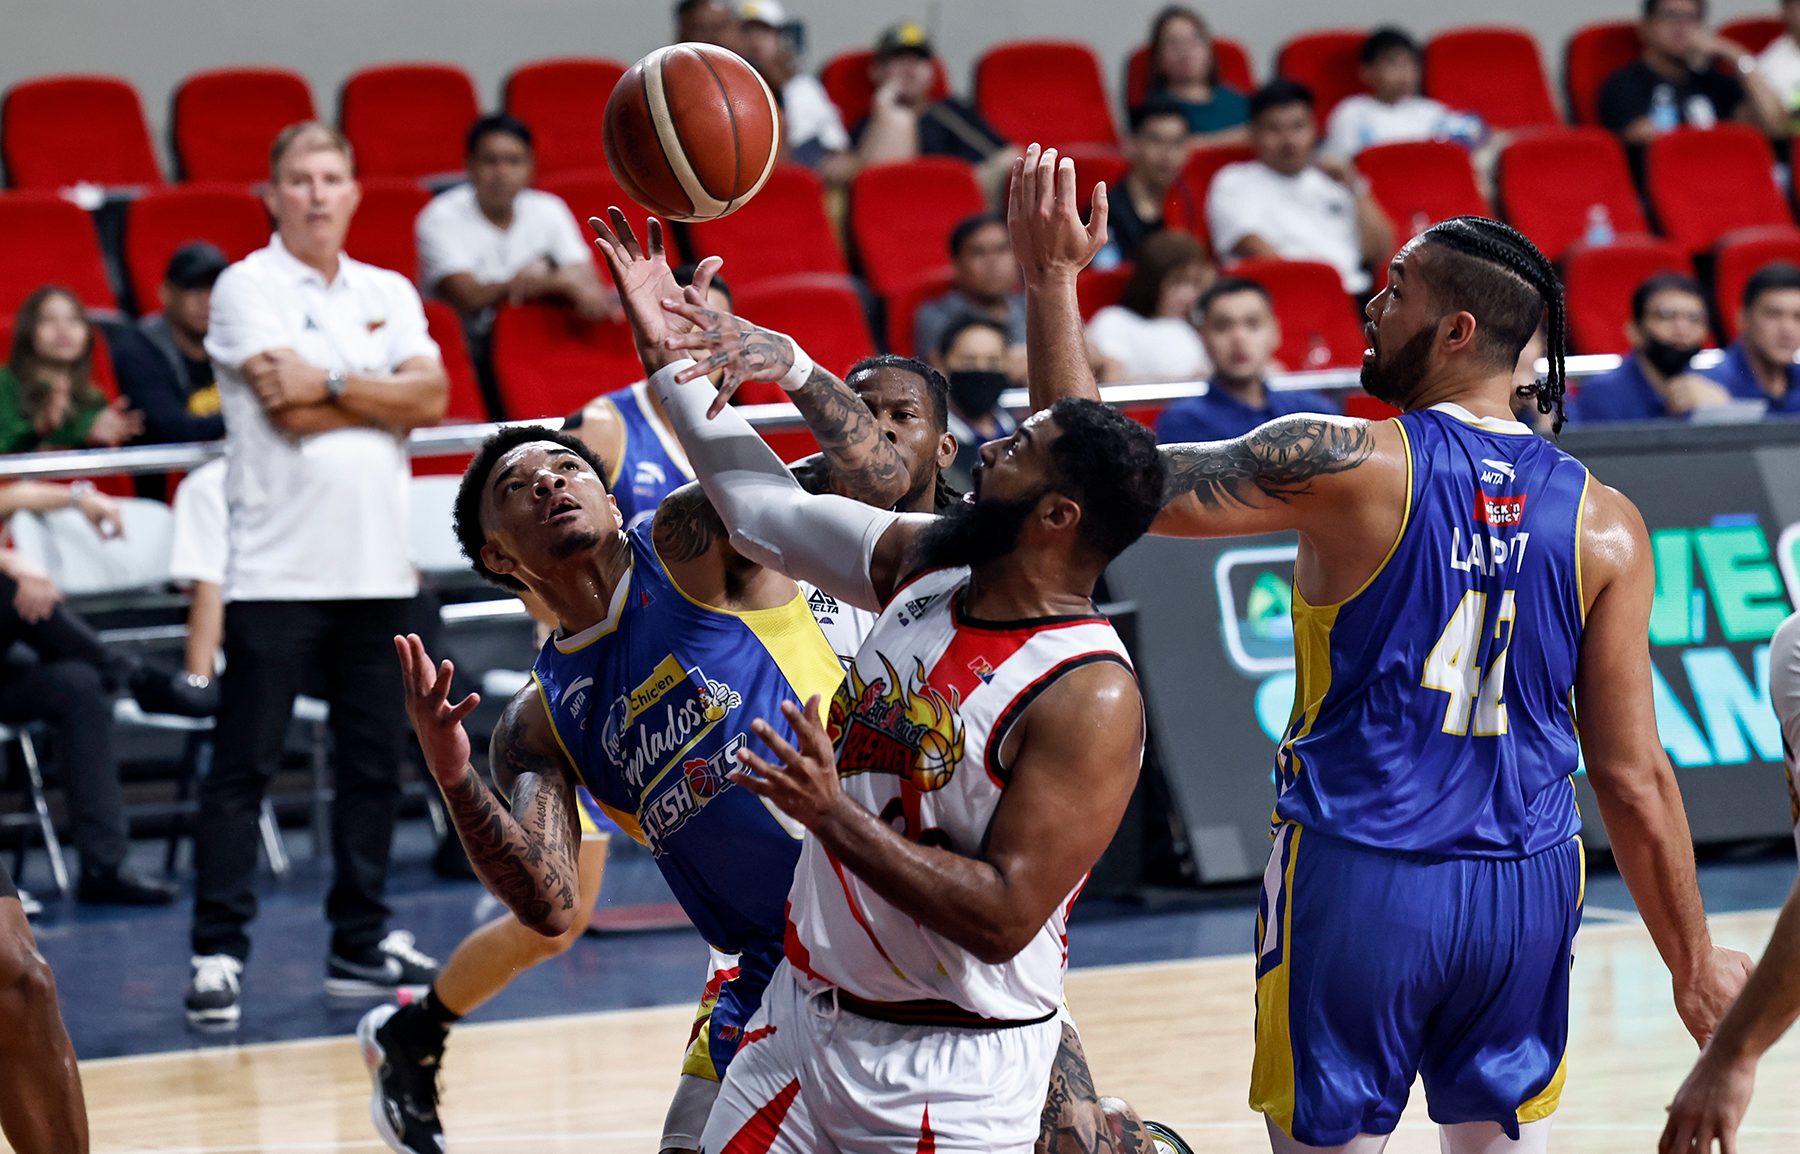 Bey’s 30-20 game lifts unbeaten Magnolia past San Miguel; Lofton erupts for 54 in Meralco win